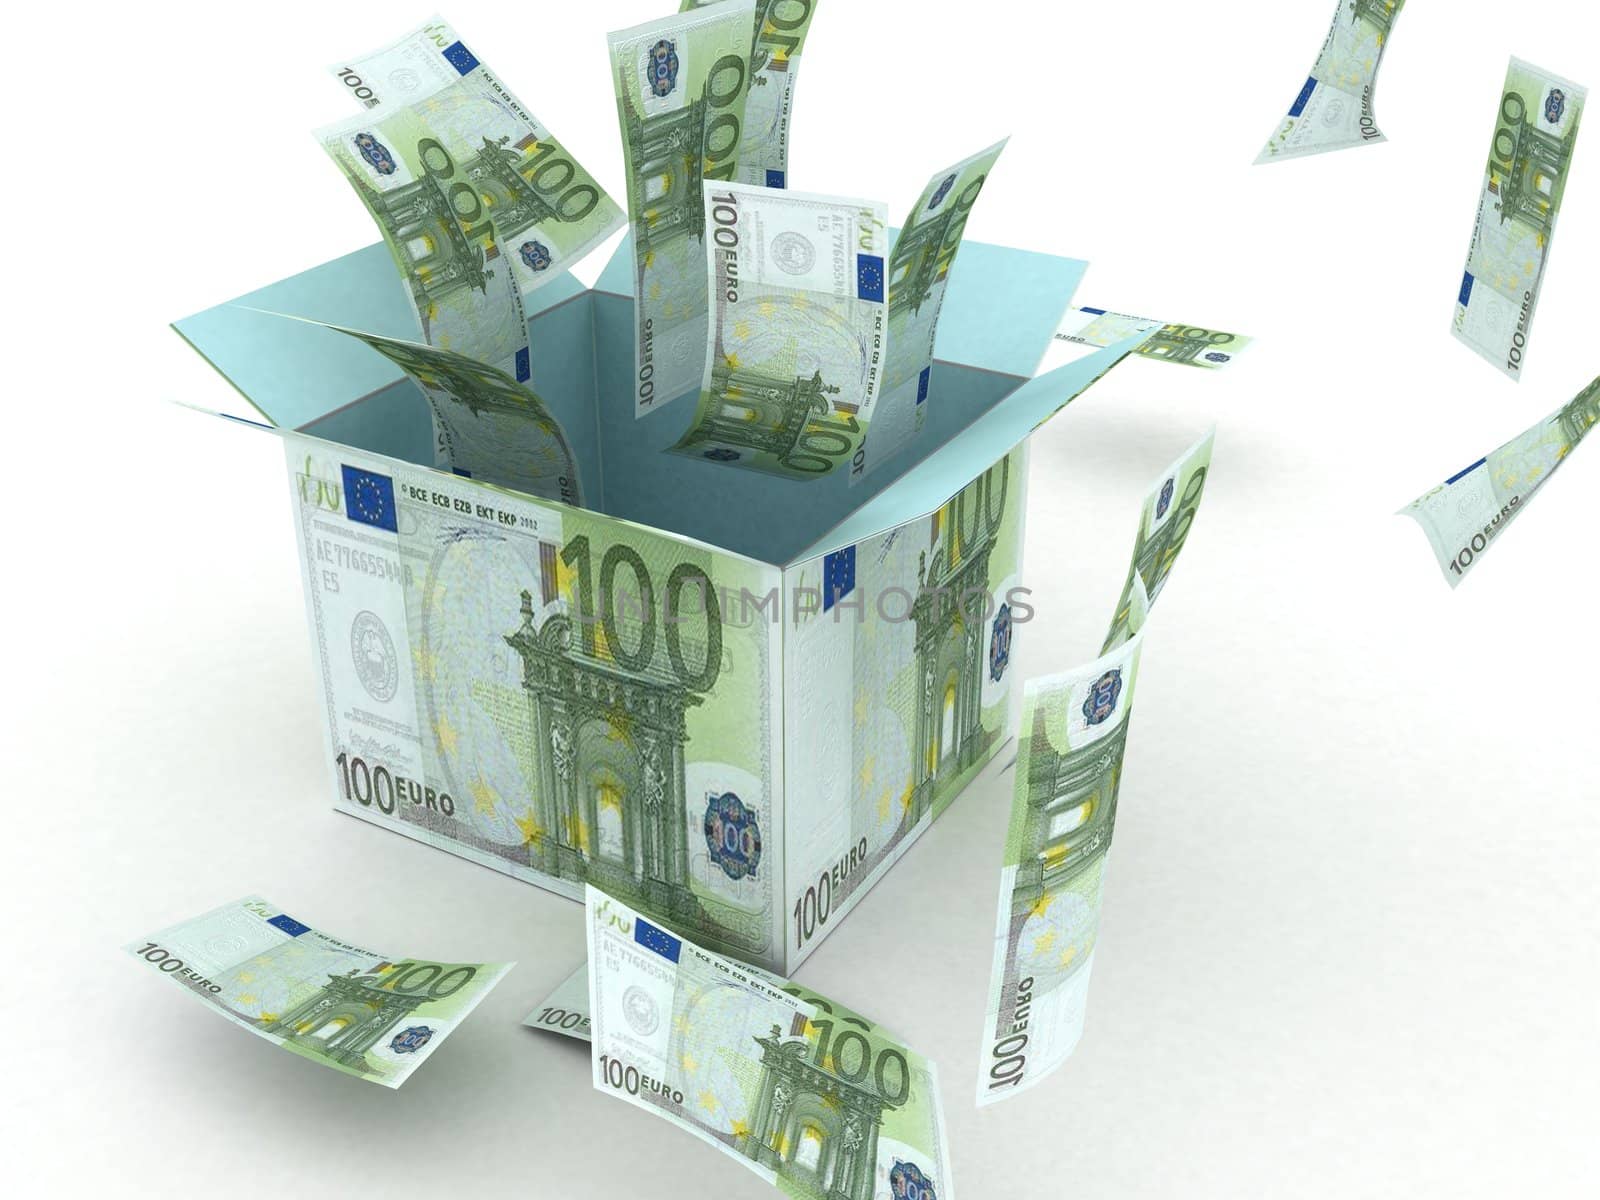 three dimensional gift box opened with 100 euro bills flying in the air  by imagerymajestic